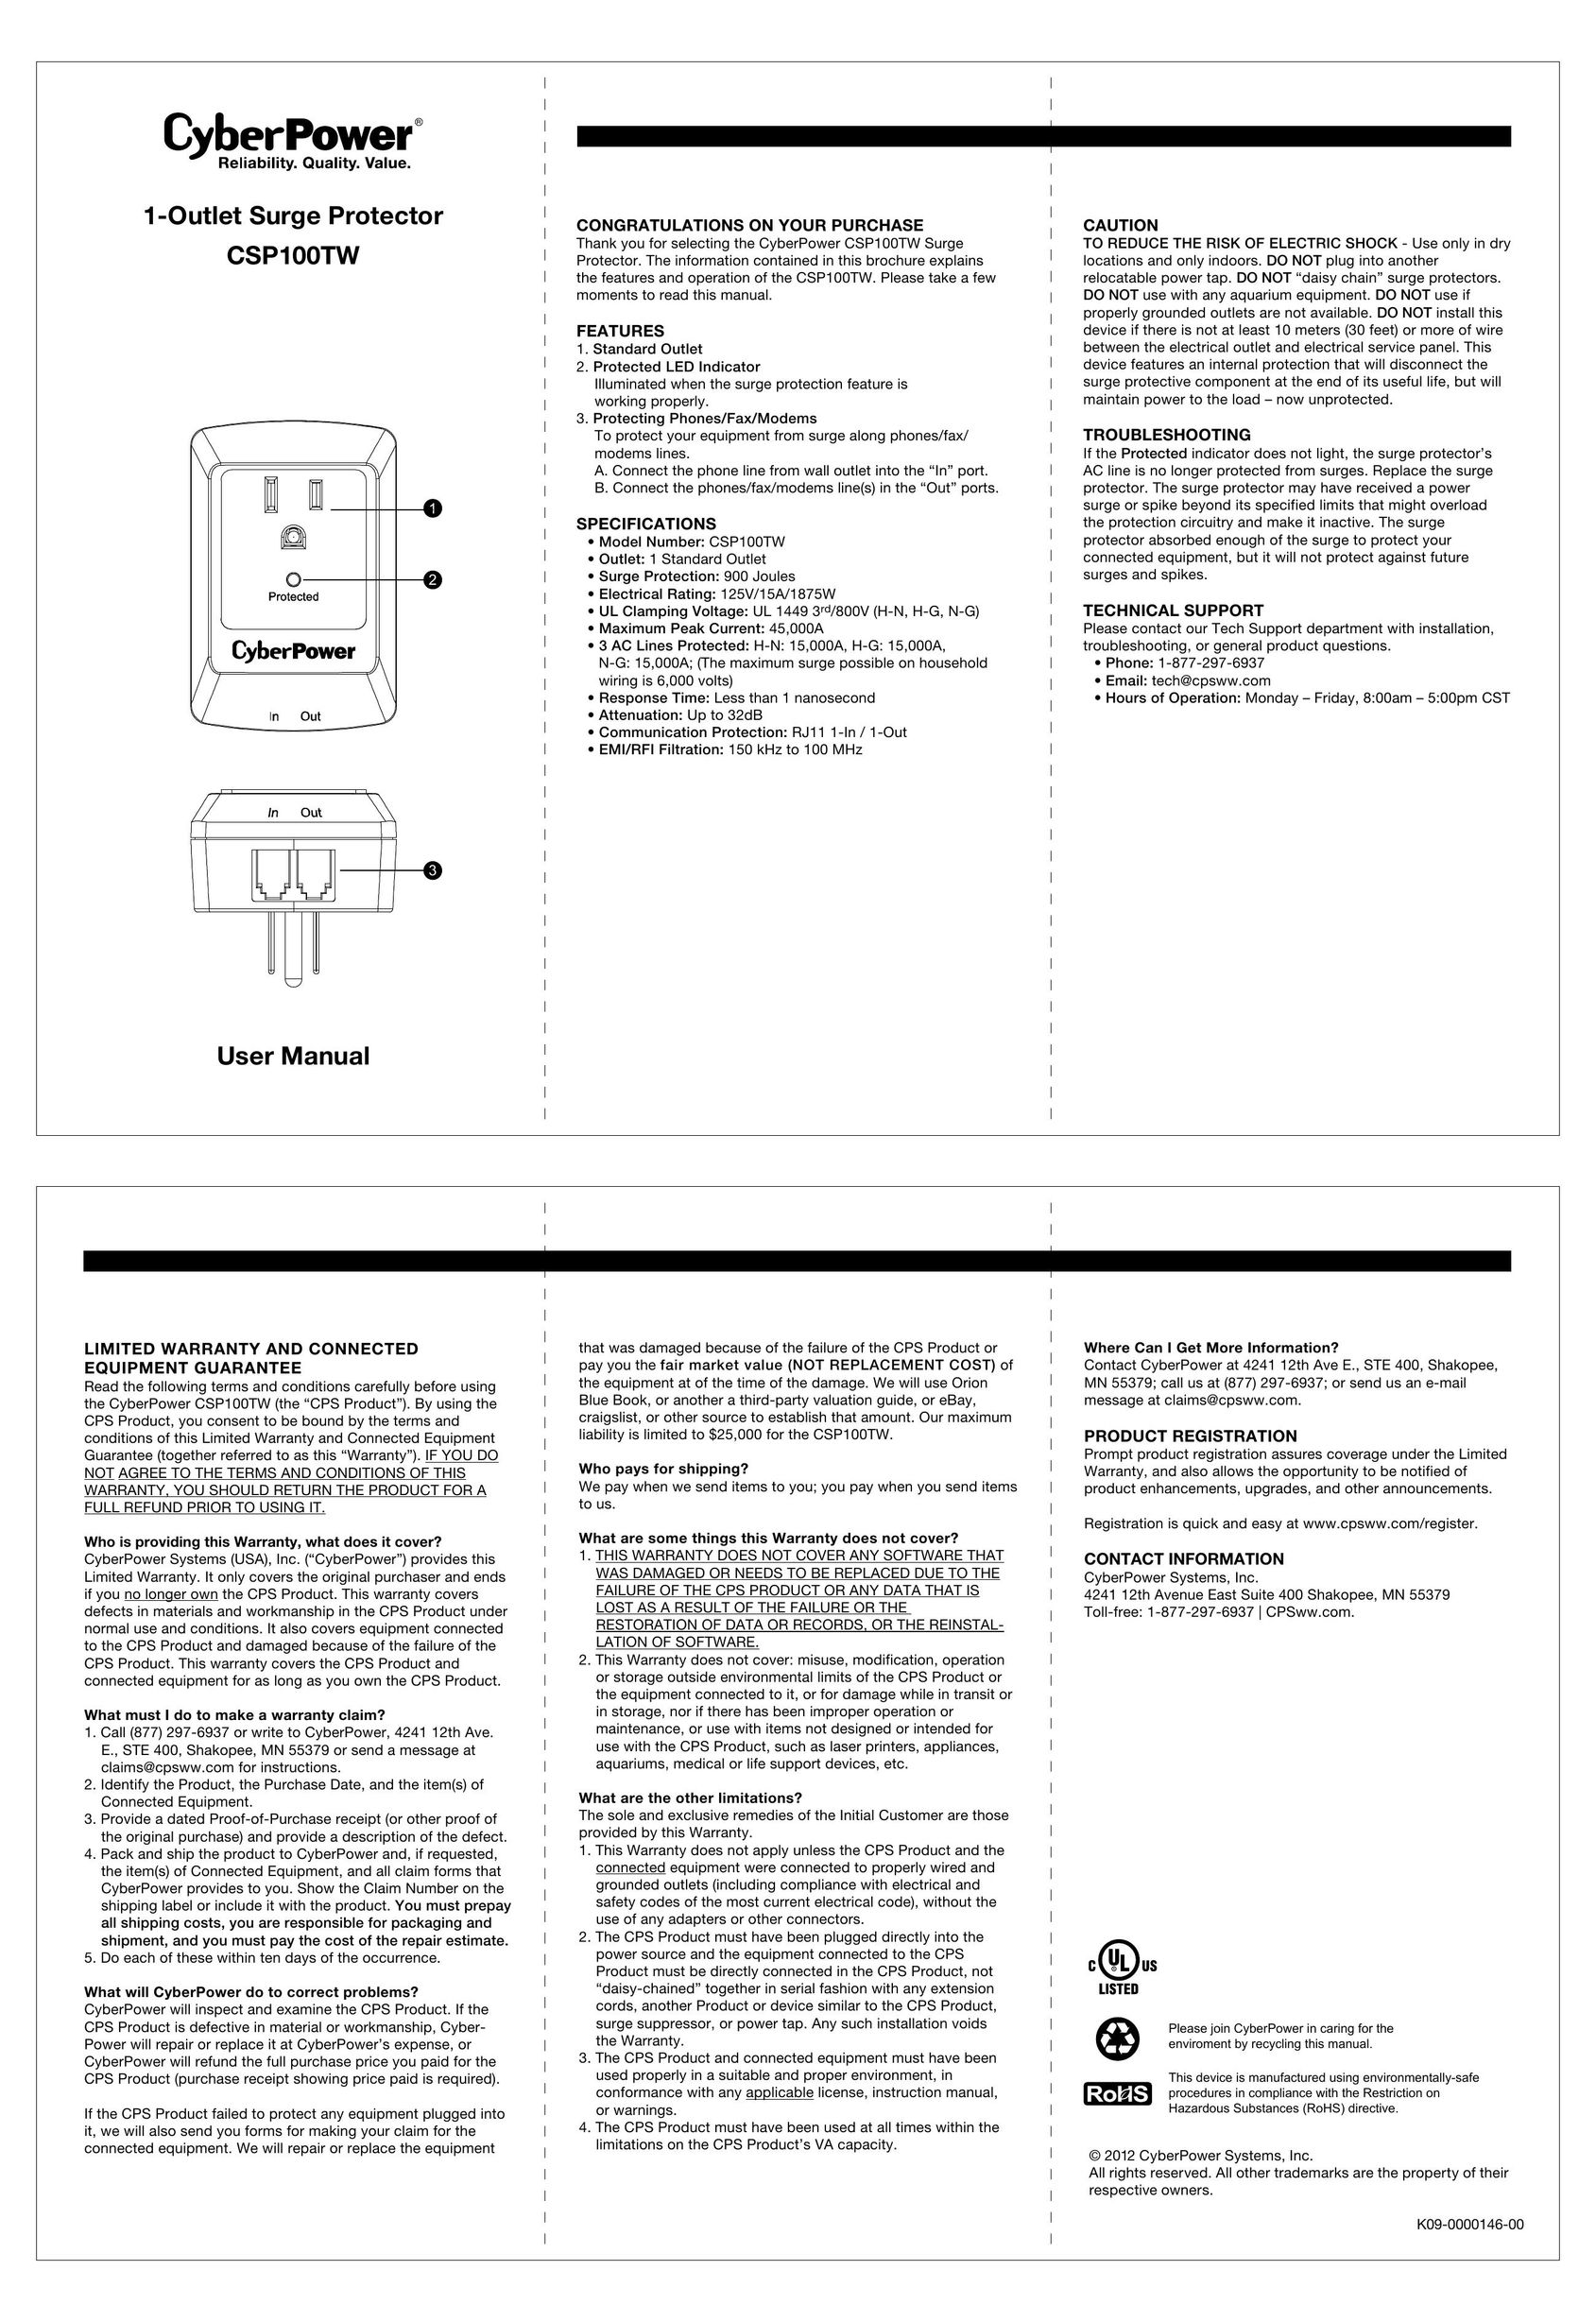 CyberPower CSP100TW Surge Protector User Manual